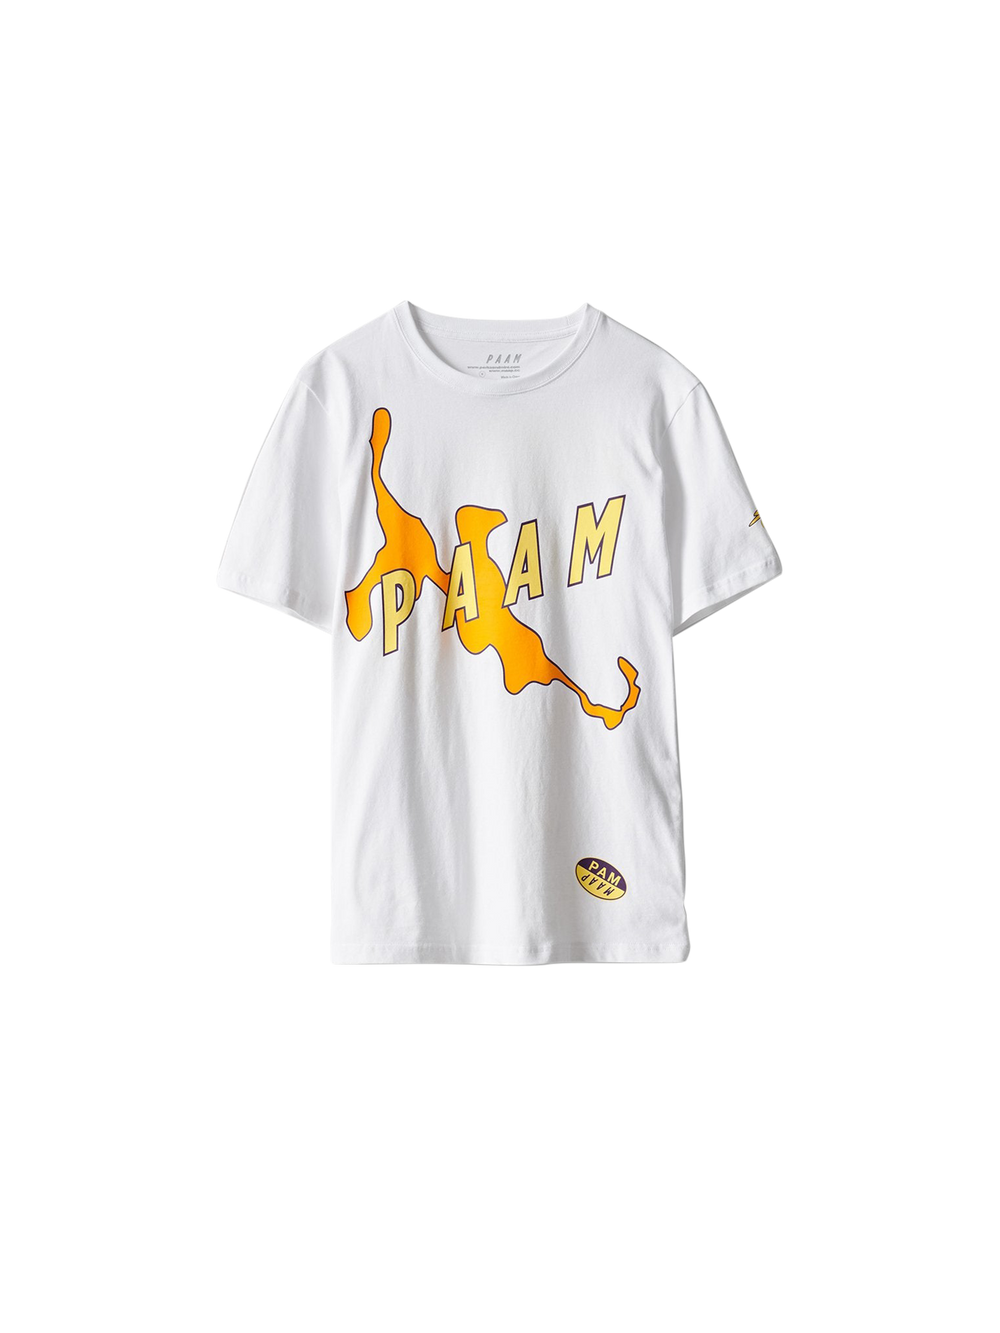 Product Image for PAAM 1.5 Tee - Unisex